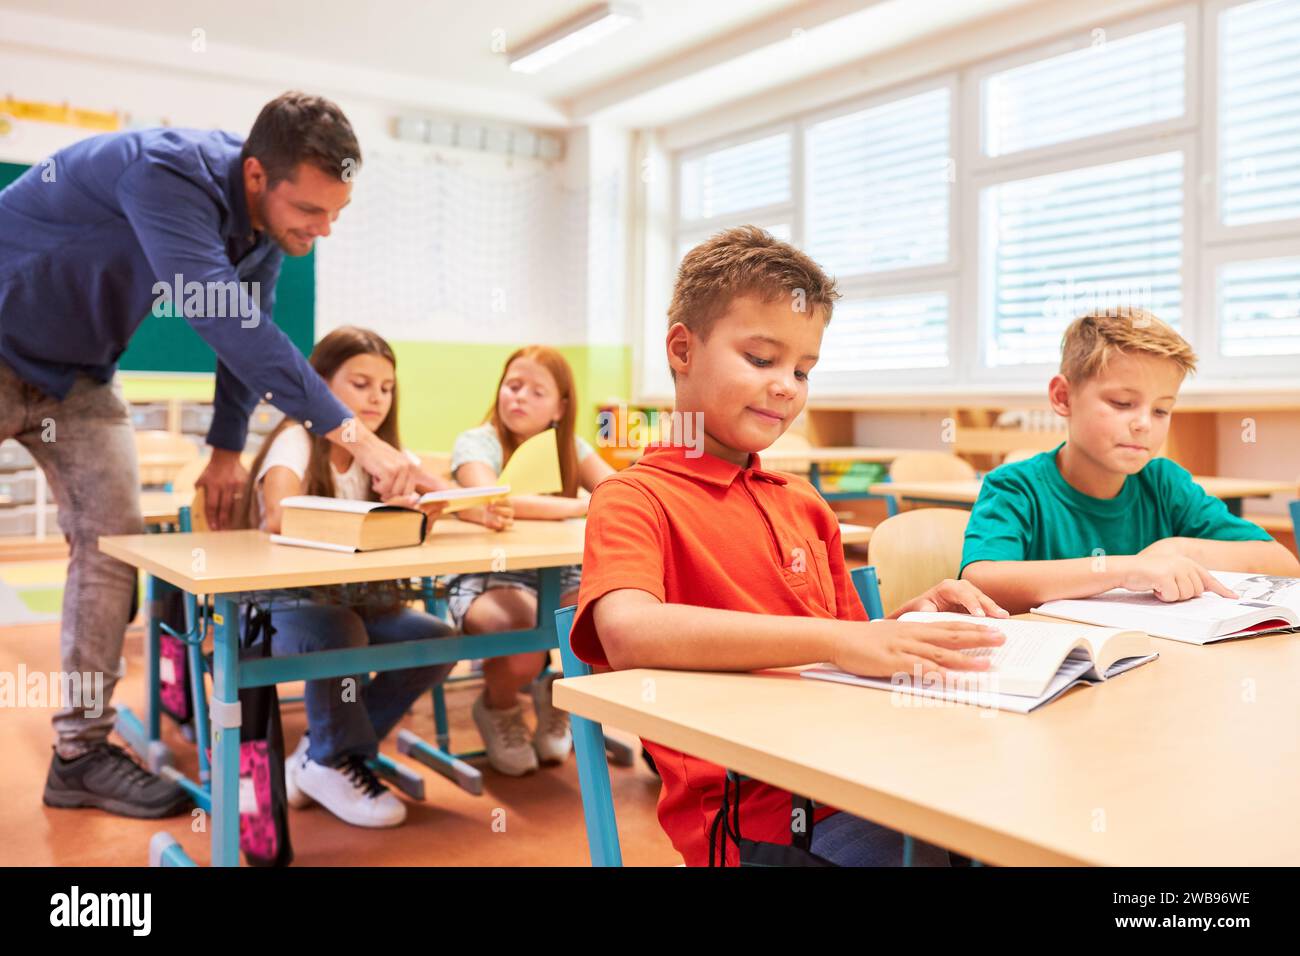 Group of elementary school children studying together in classroom Stock Photo